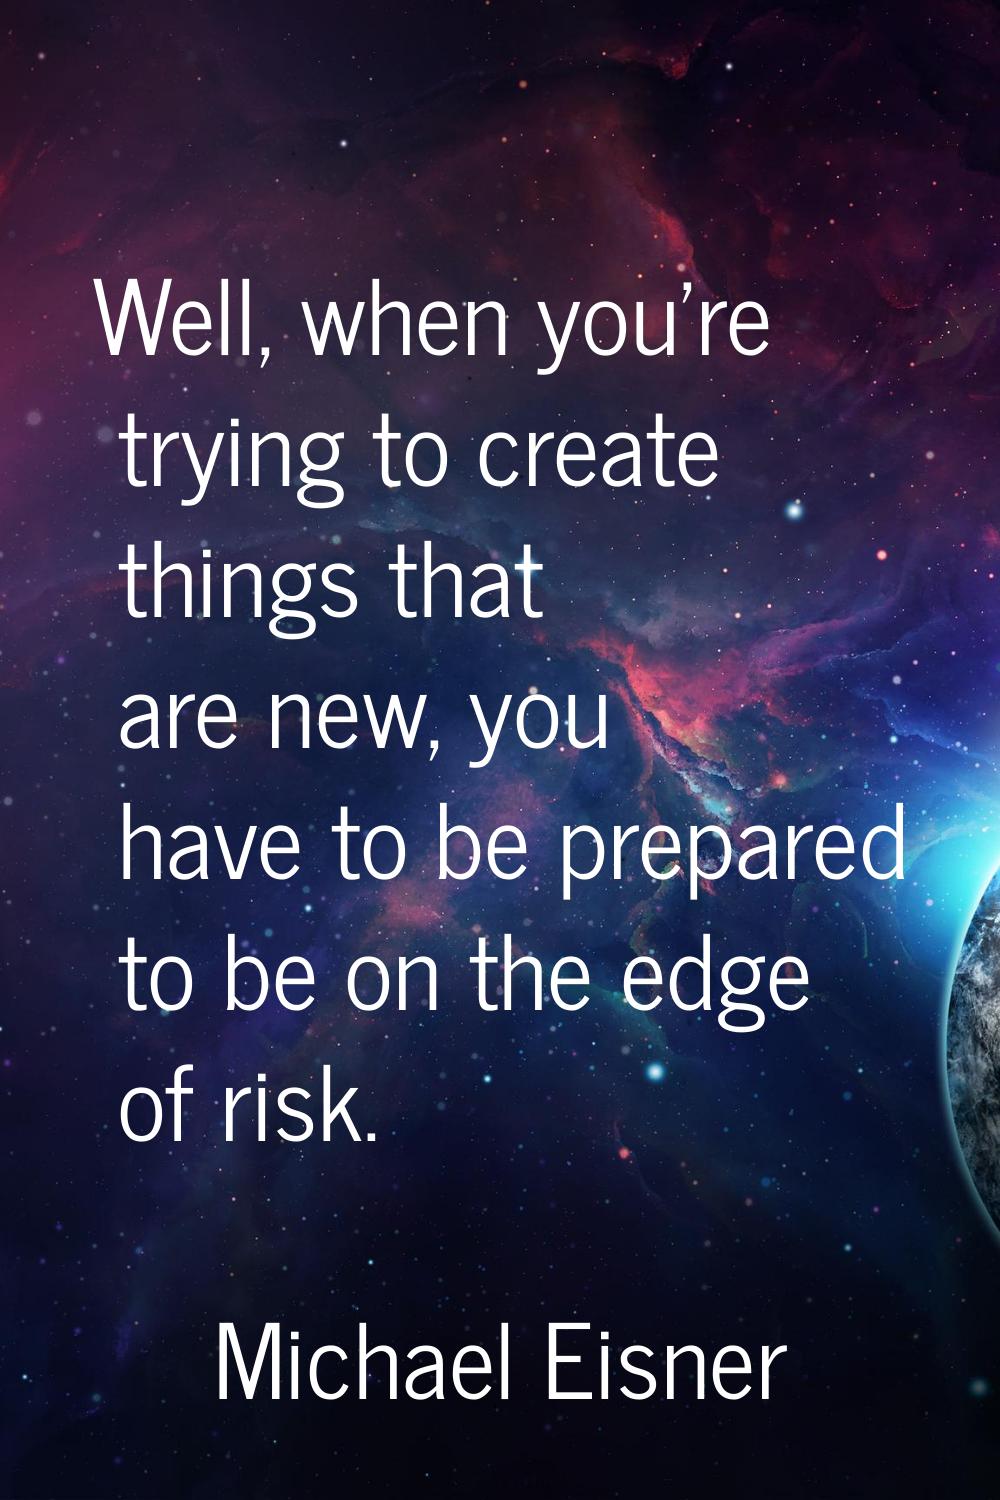 Well, when you're trying to create things that are new, you have to be prepared to be on the edge o